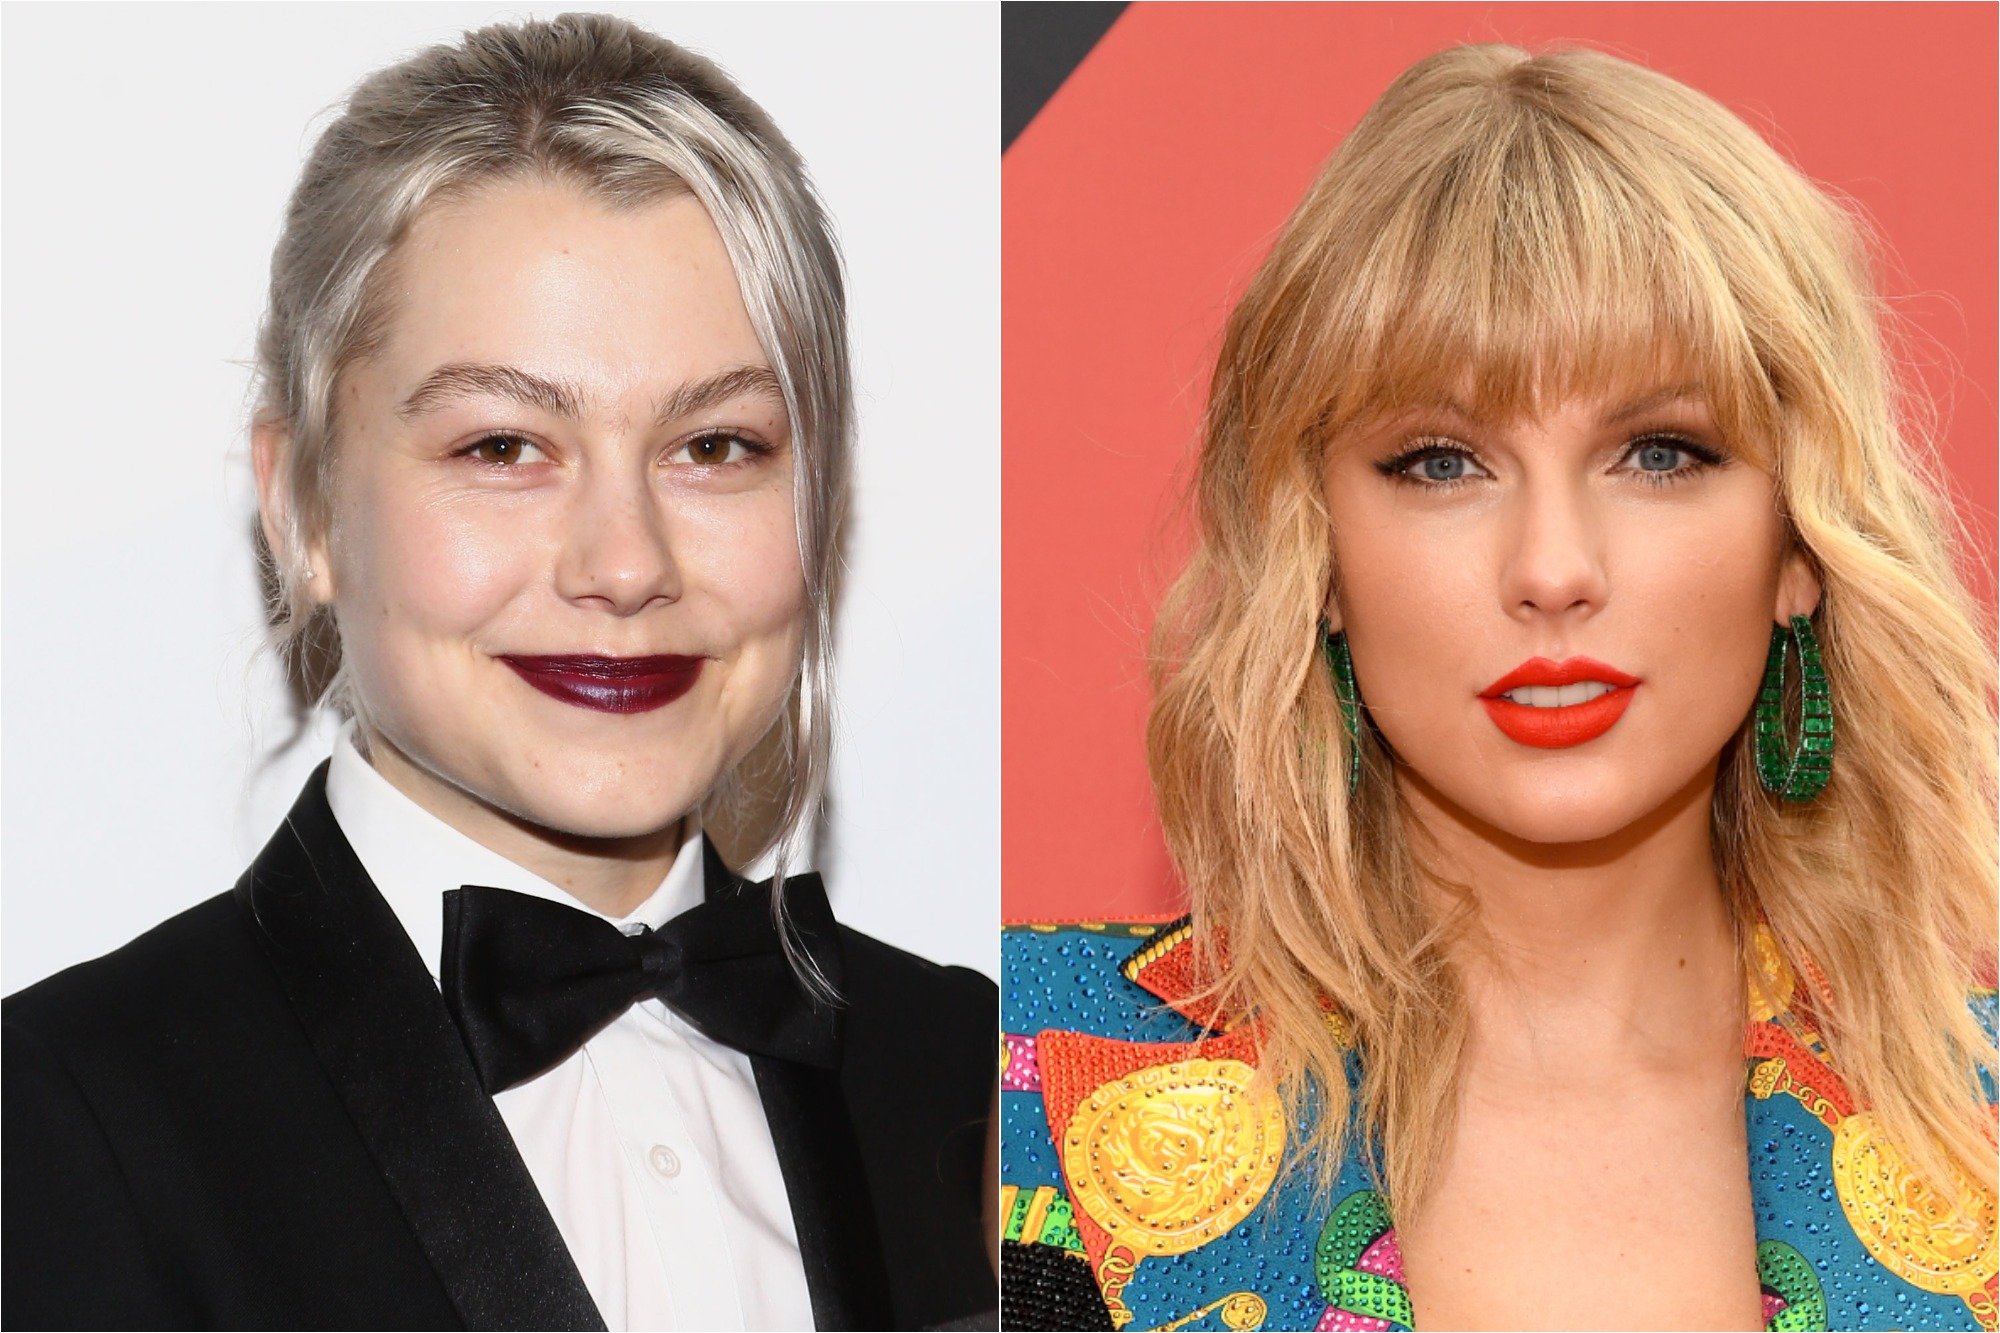 (L) Phoebe Bridgers at the 2019 GQ Men Of The Year on Dec. 05, 2019 / (R) Taylor Swift at the 2019 MTV Video Music Awards on Aug. 26, 2019